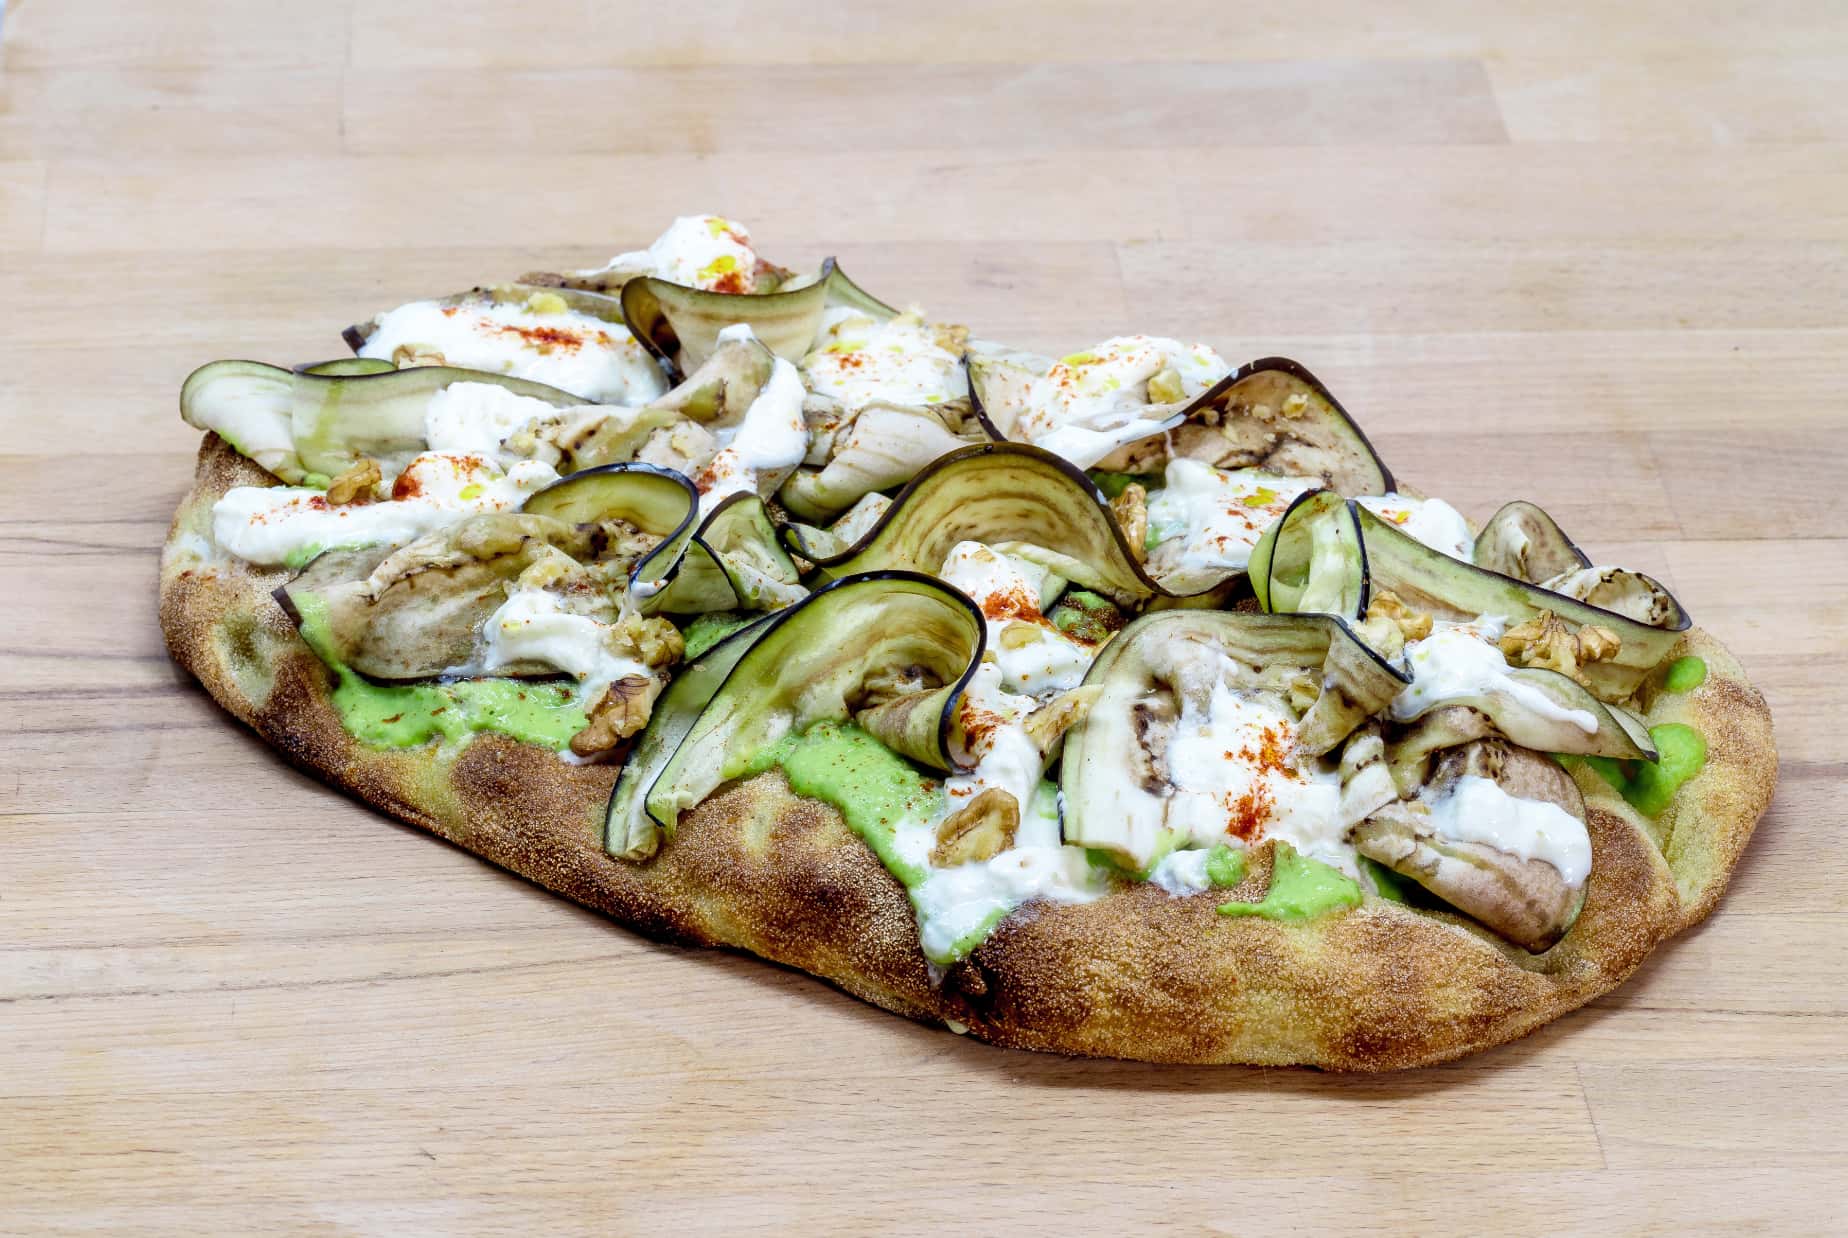 Photo of a Pinsa topped with zucchini, burrata cheese and sauces